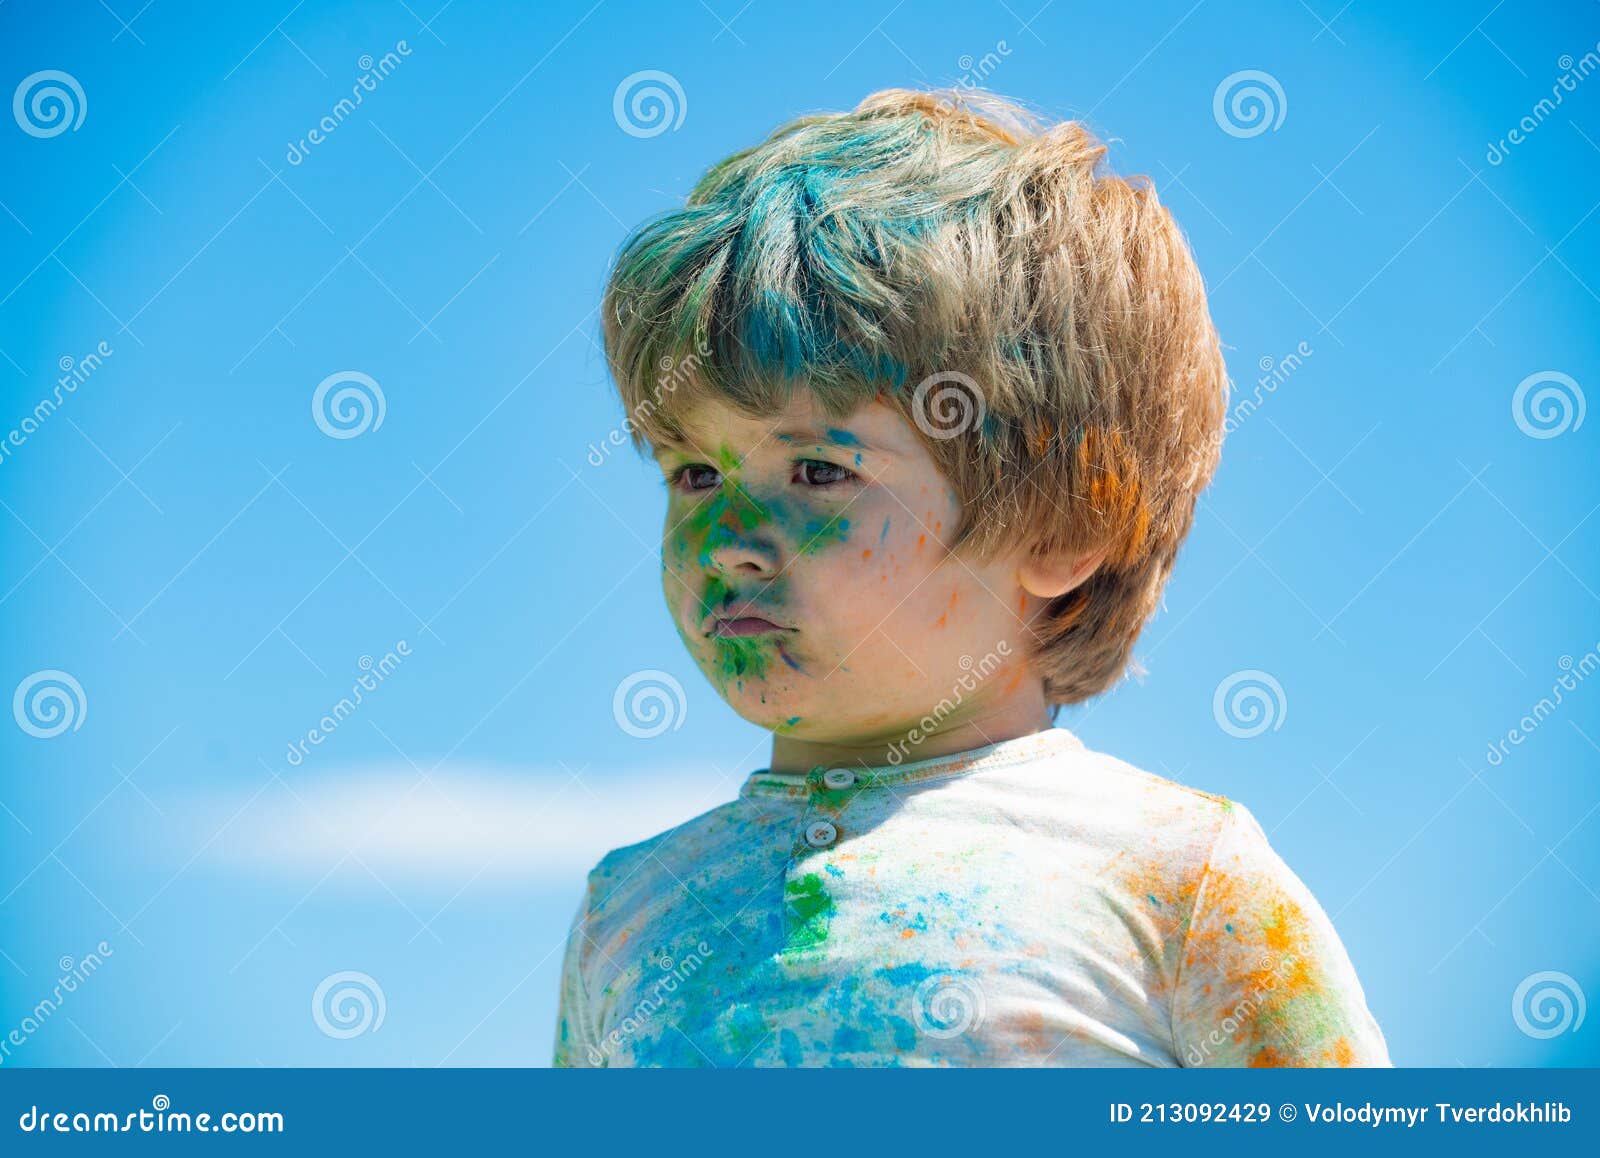 Child Holi Festival. Painted Face of Funny Kid. Little Boy Plays with  Colors. Stock Image - Image of festival, positive: 213092429